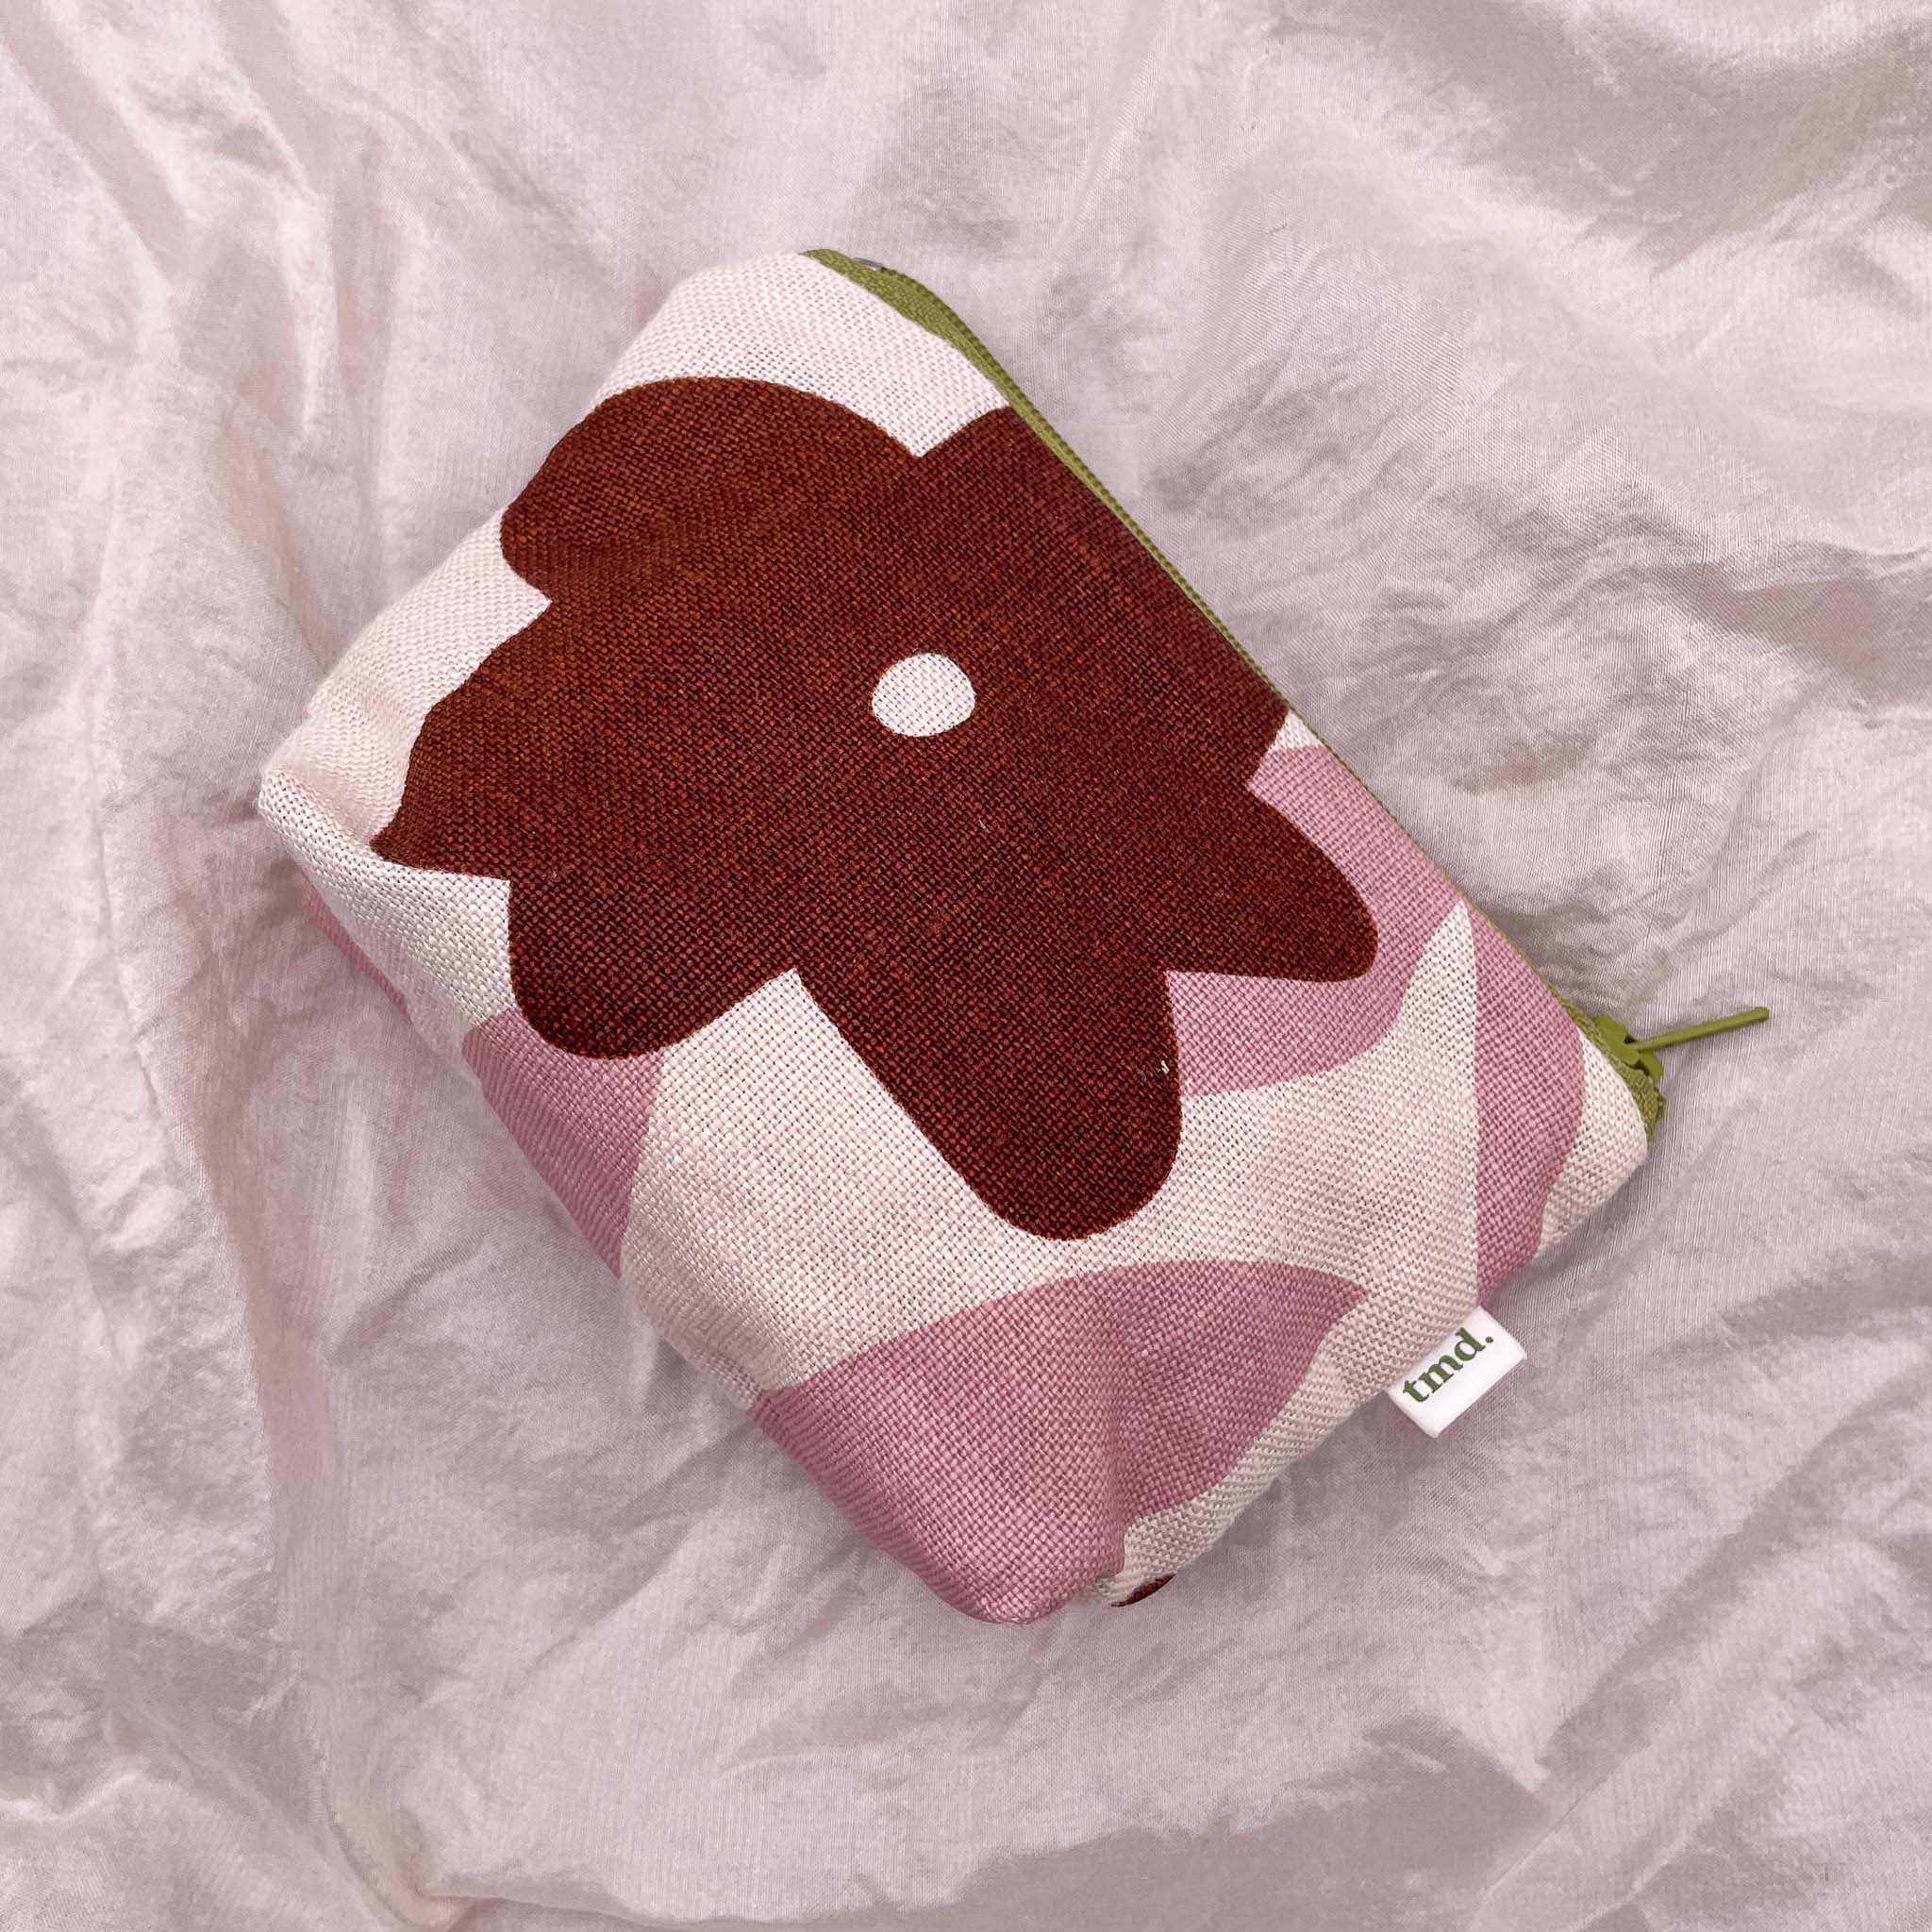 Little Bag - Abstract Floral in Dusty Pink and Chocolate